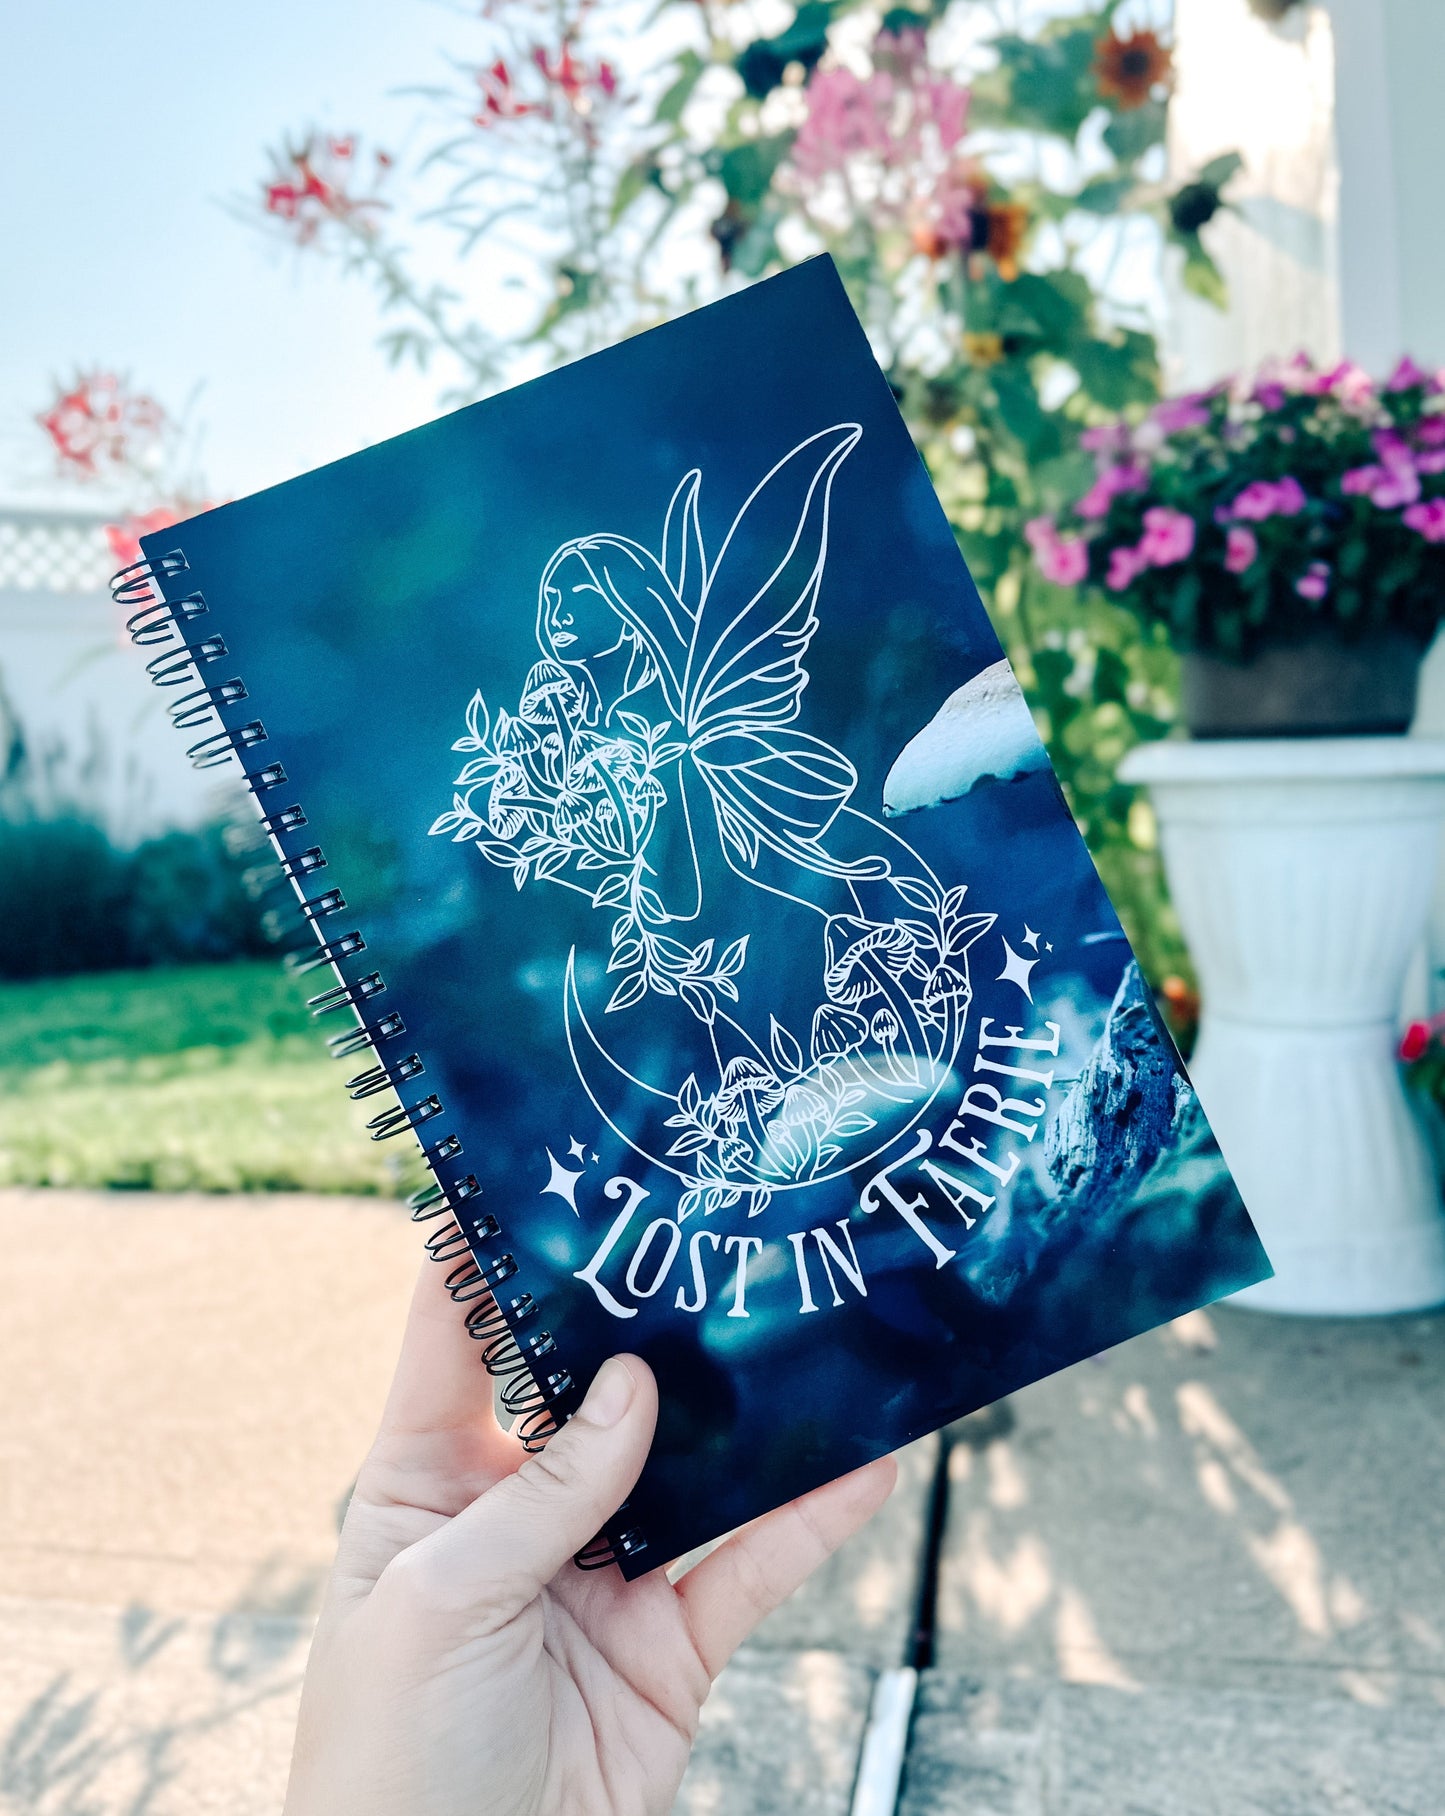 Lost in Faerie Spiral notebook for FireDrake Artistry Photo by @jessielovenelit